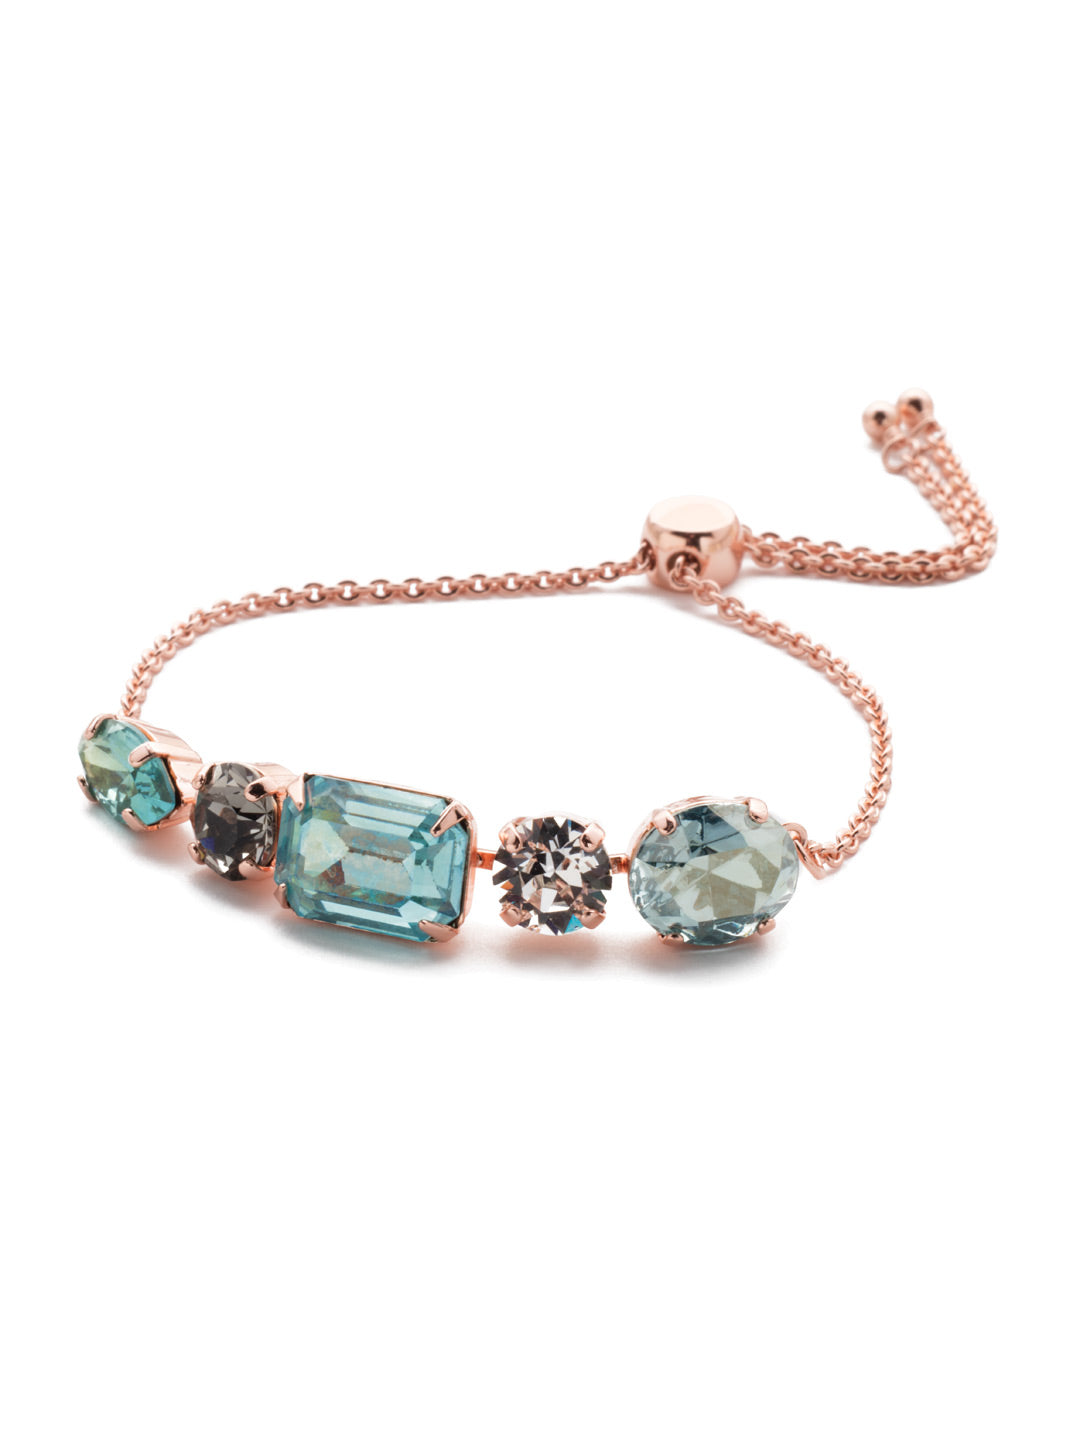 Martina Slider Bracelet - BET6RGCAZ - <p>The Martina Slider Bracelet gives sparkle fans a bit of everything they love in cushion emerald, round and navette crystals. Just adjust to your wrist size and go. From Sorrelli's Crystal Azure collection in our Rose Gold-tone finish.</p>